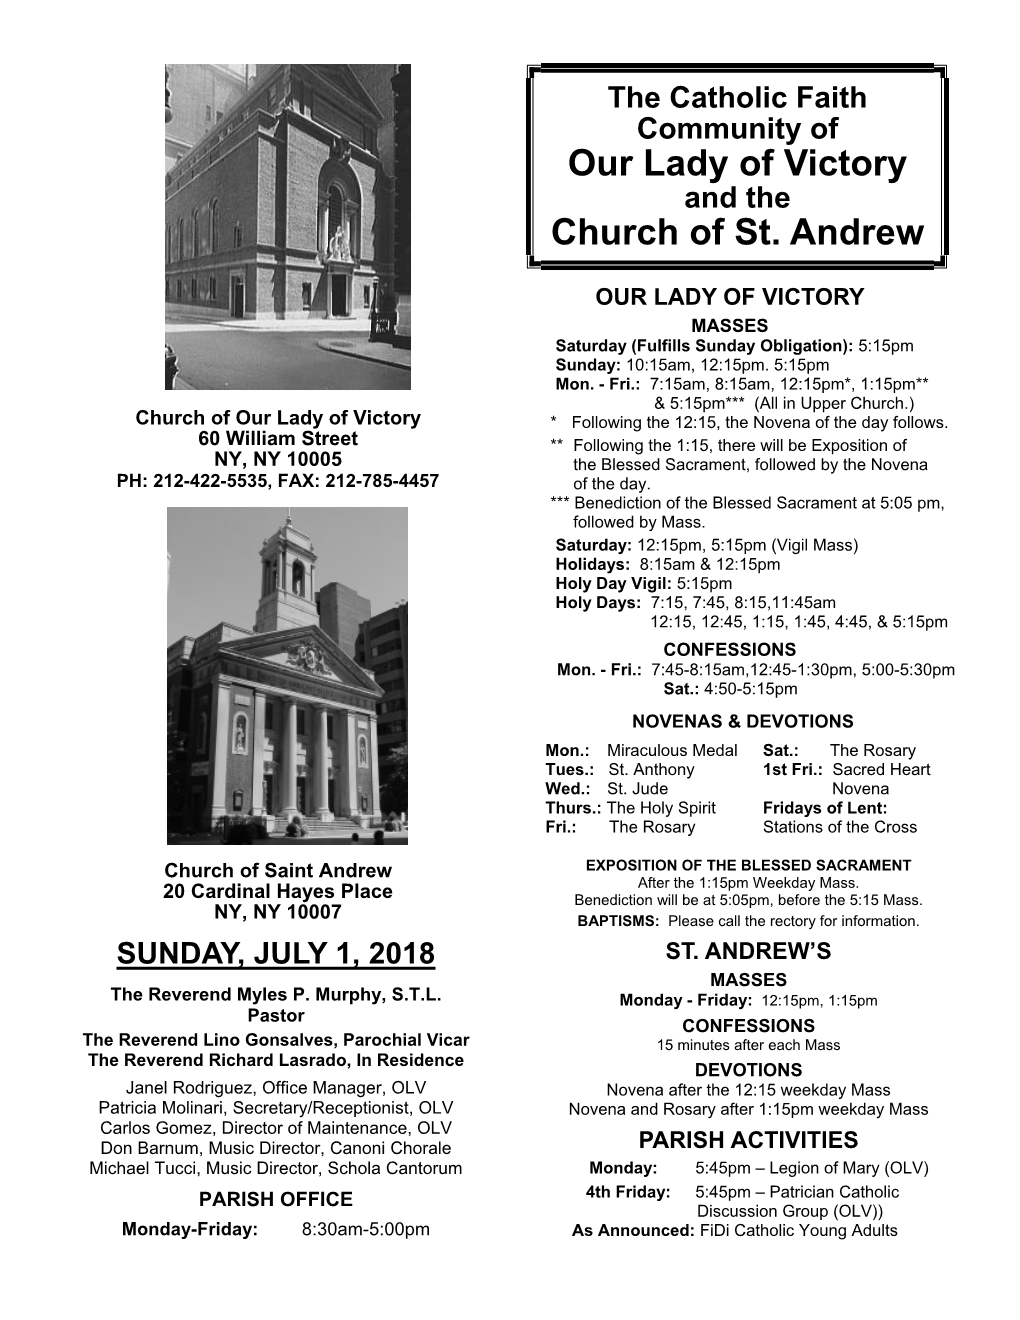 Our Lady of Victory Church of St. Andrew